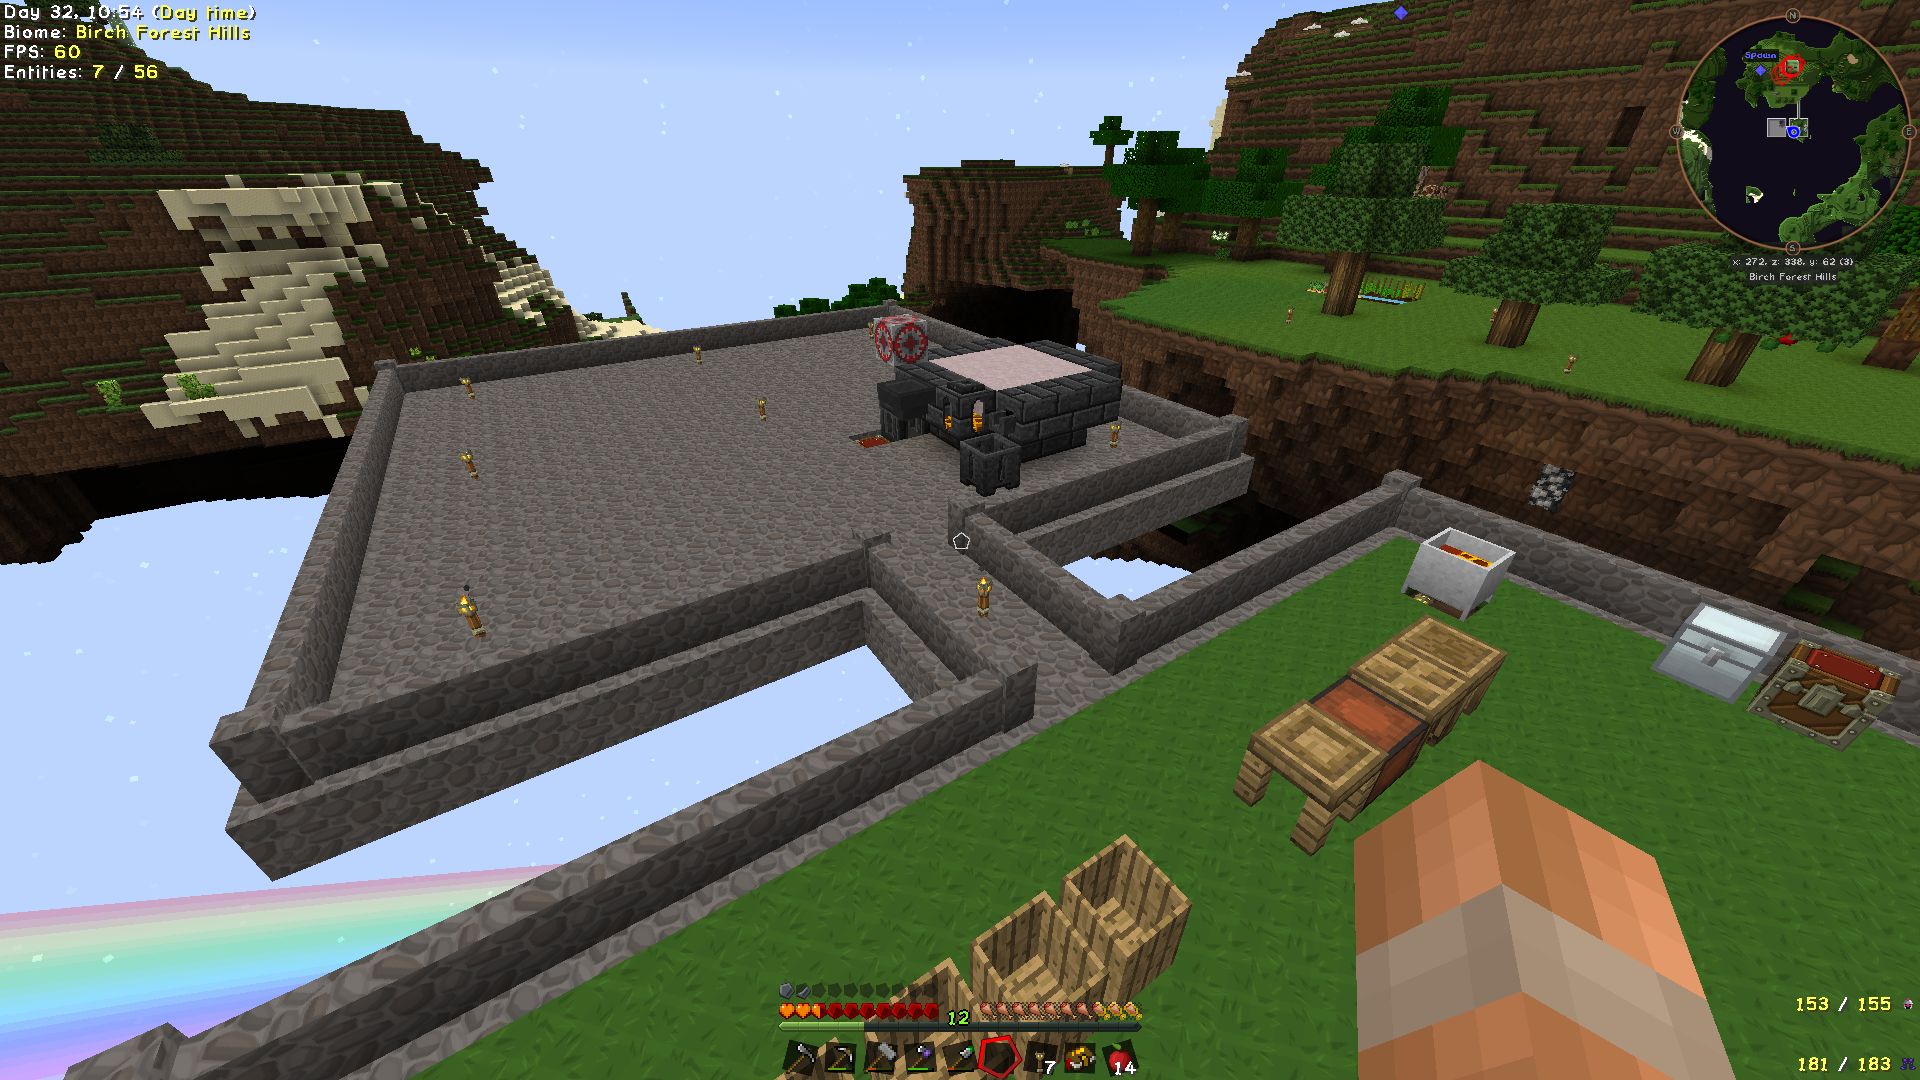 The smeltery is born!